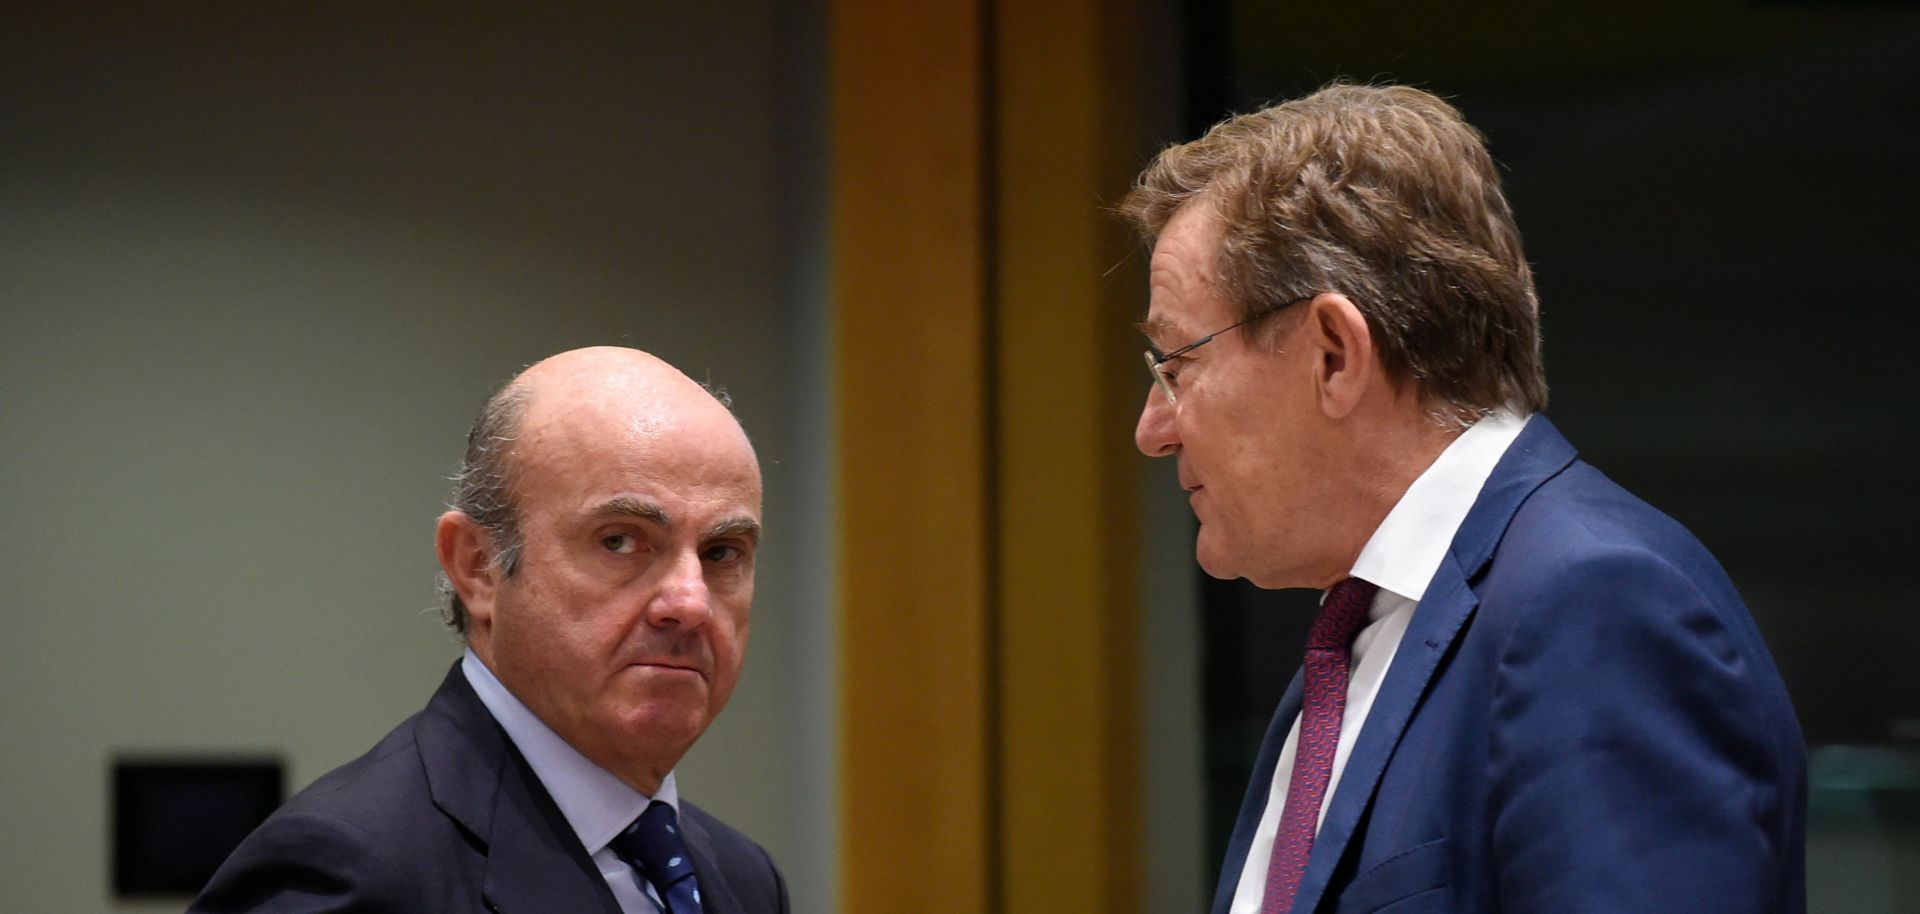 Spanish Economy Minister Luis de Guindos (L) talks with Belgian Finance Minister Johan Van Overtveldt during a meeting in Brussels on Feb. 20.